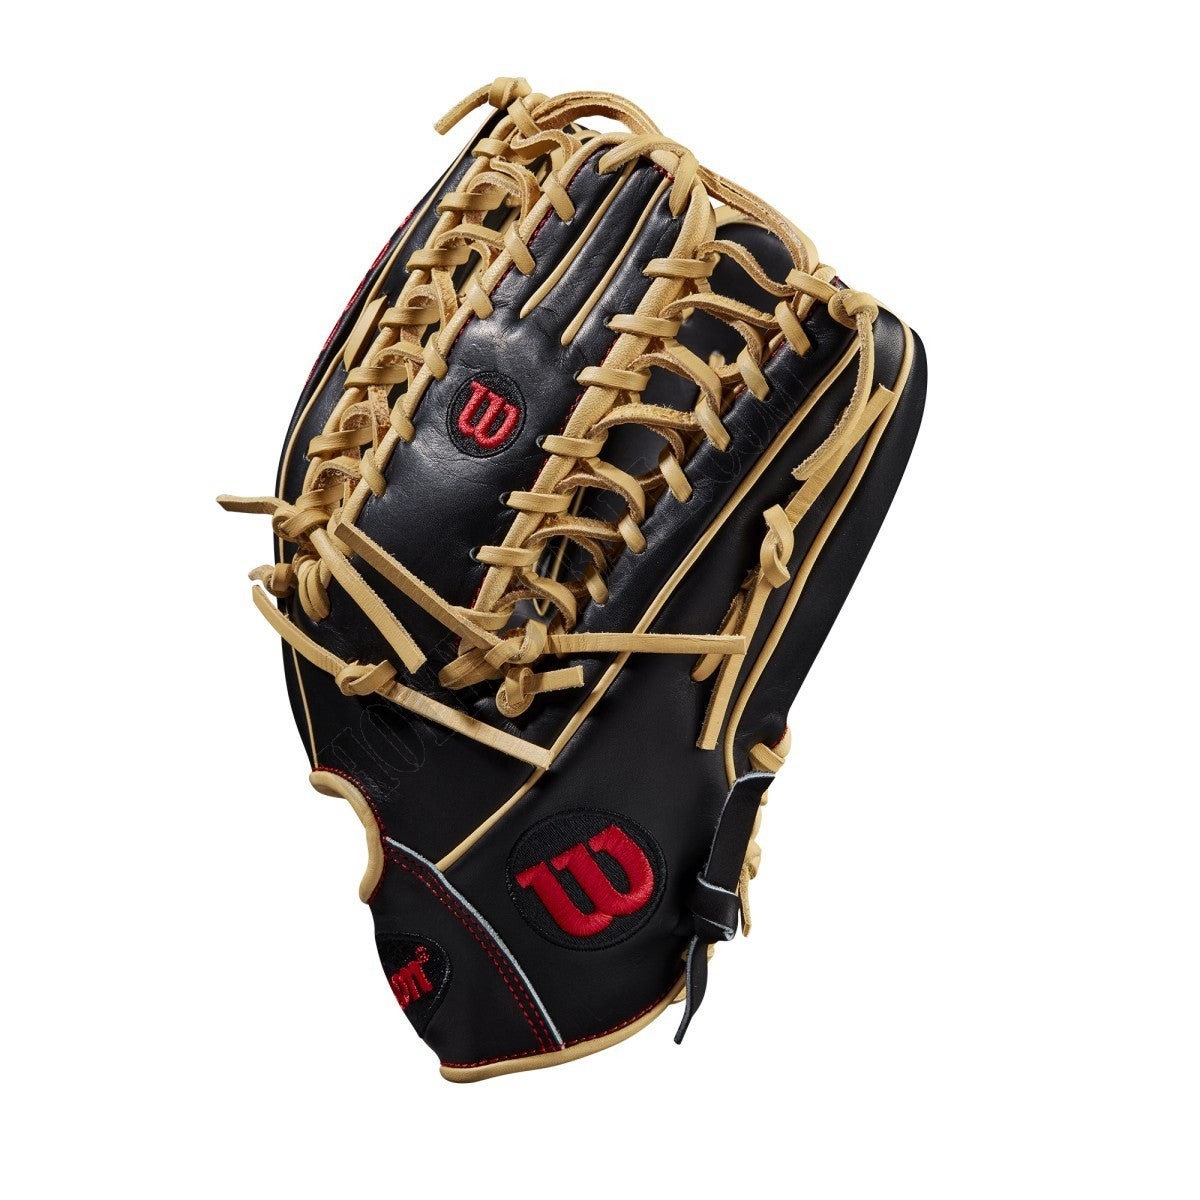 2020 A2000 OT6 12.75" Outfield Baseball Glove ● Wilson Promotions - -3